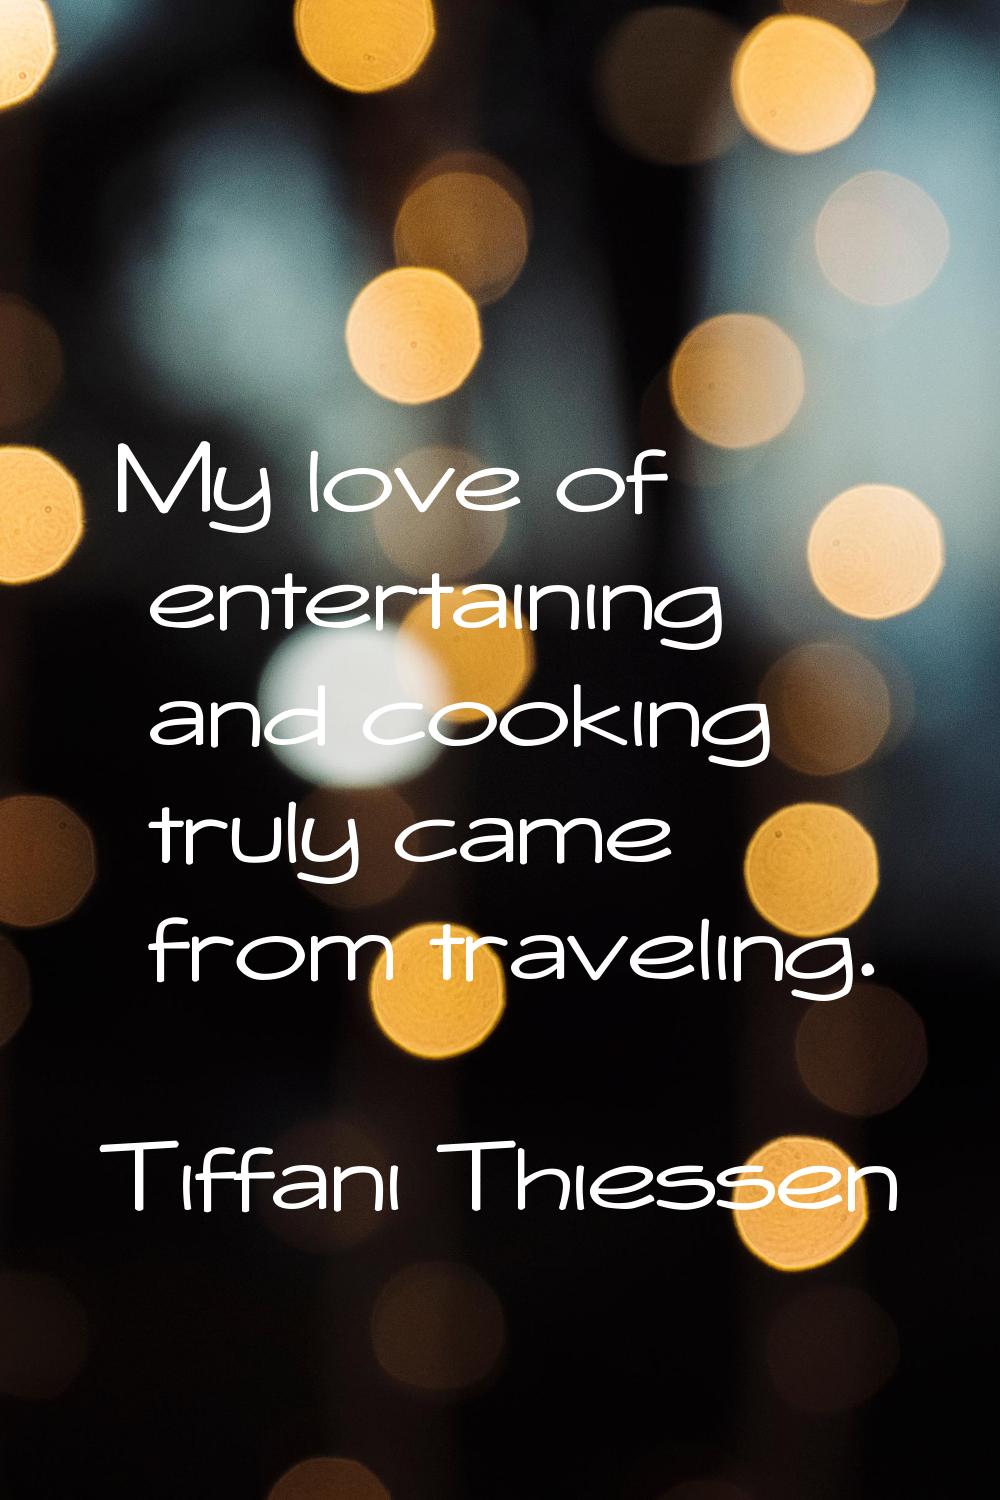 My love of entertaining and cooking truly came from traveling.